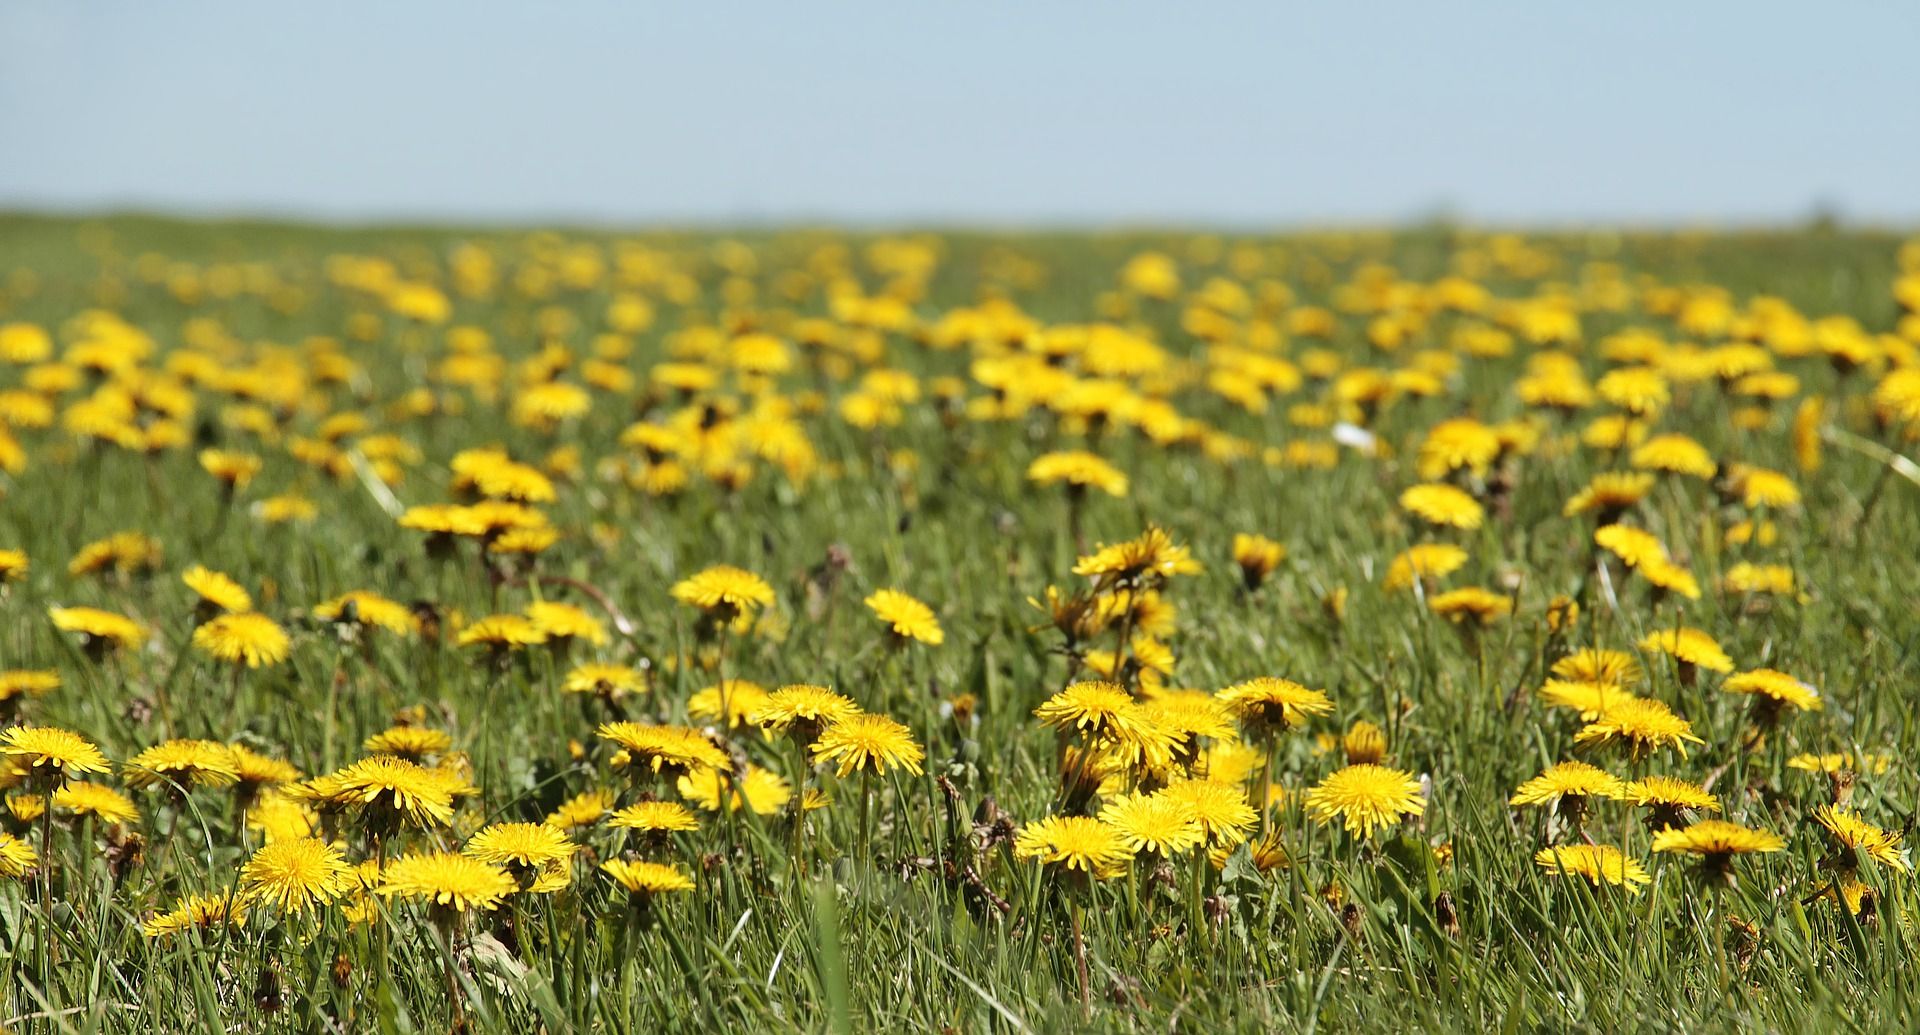 A field filled with dandelions